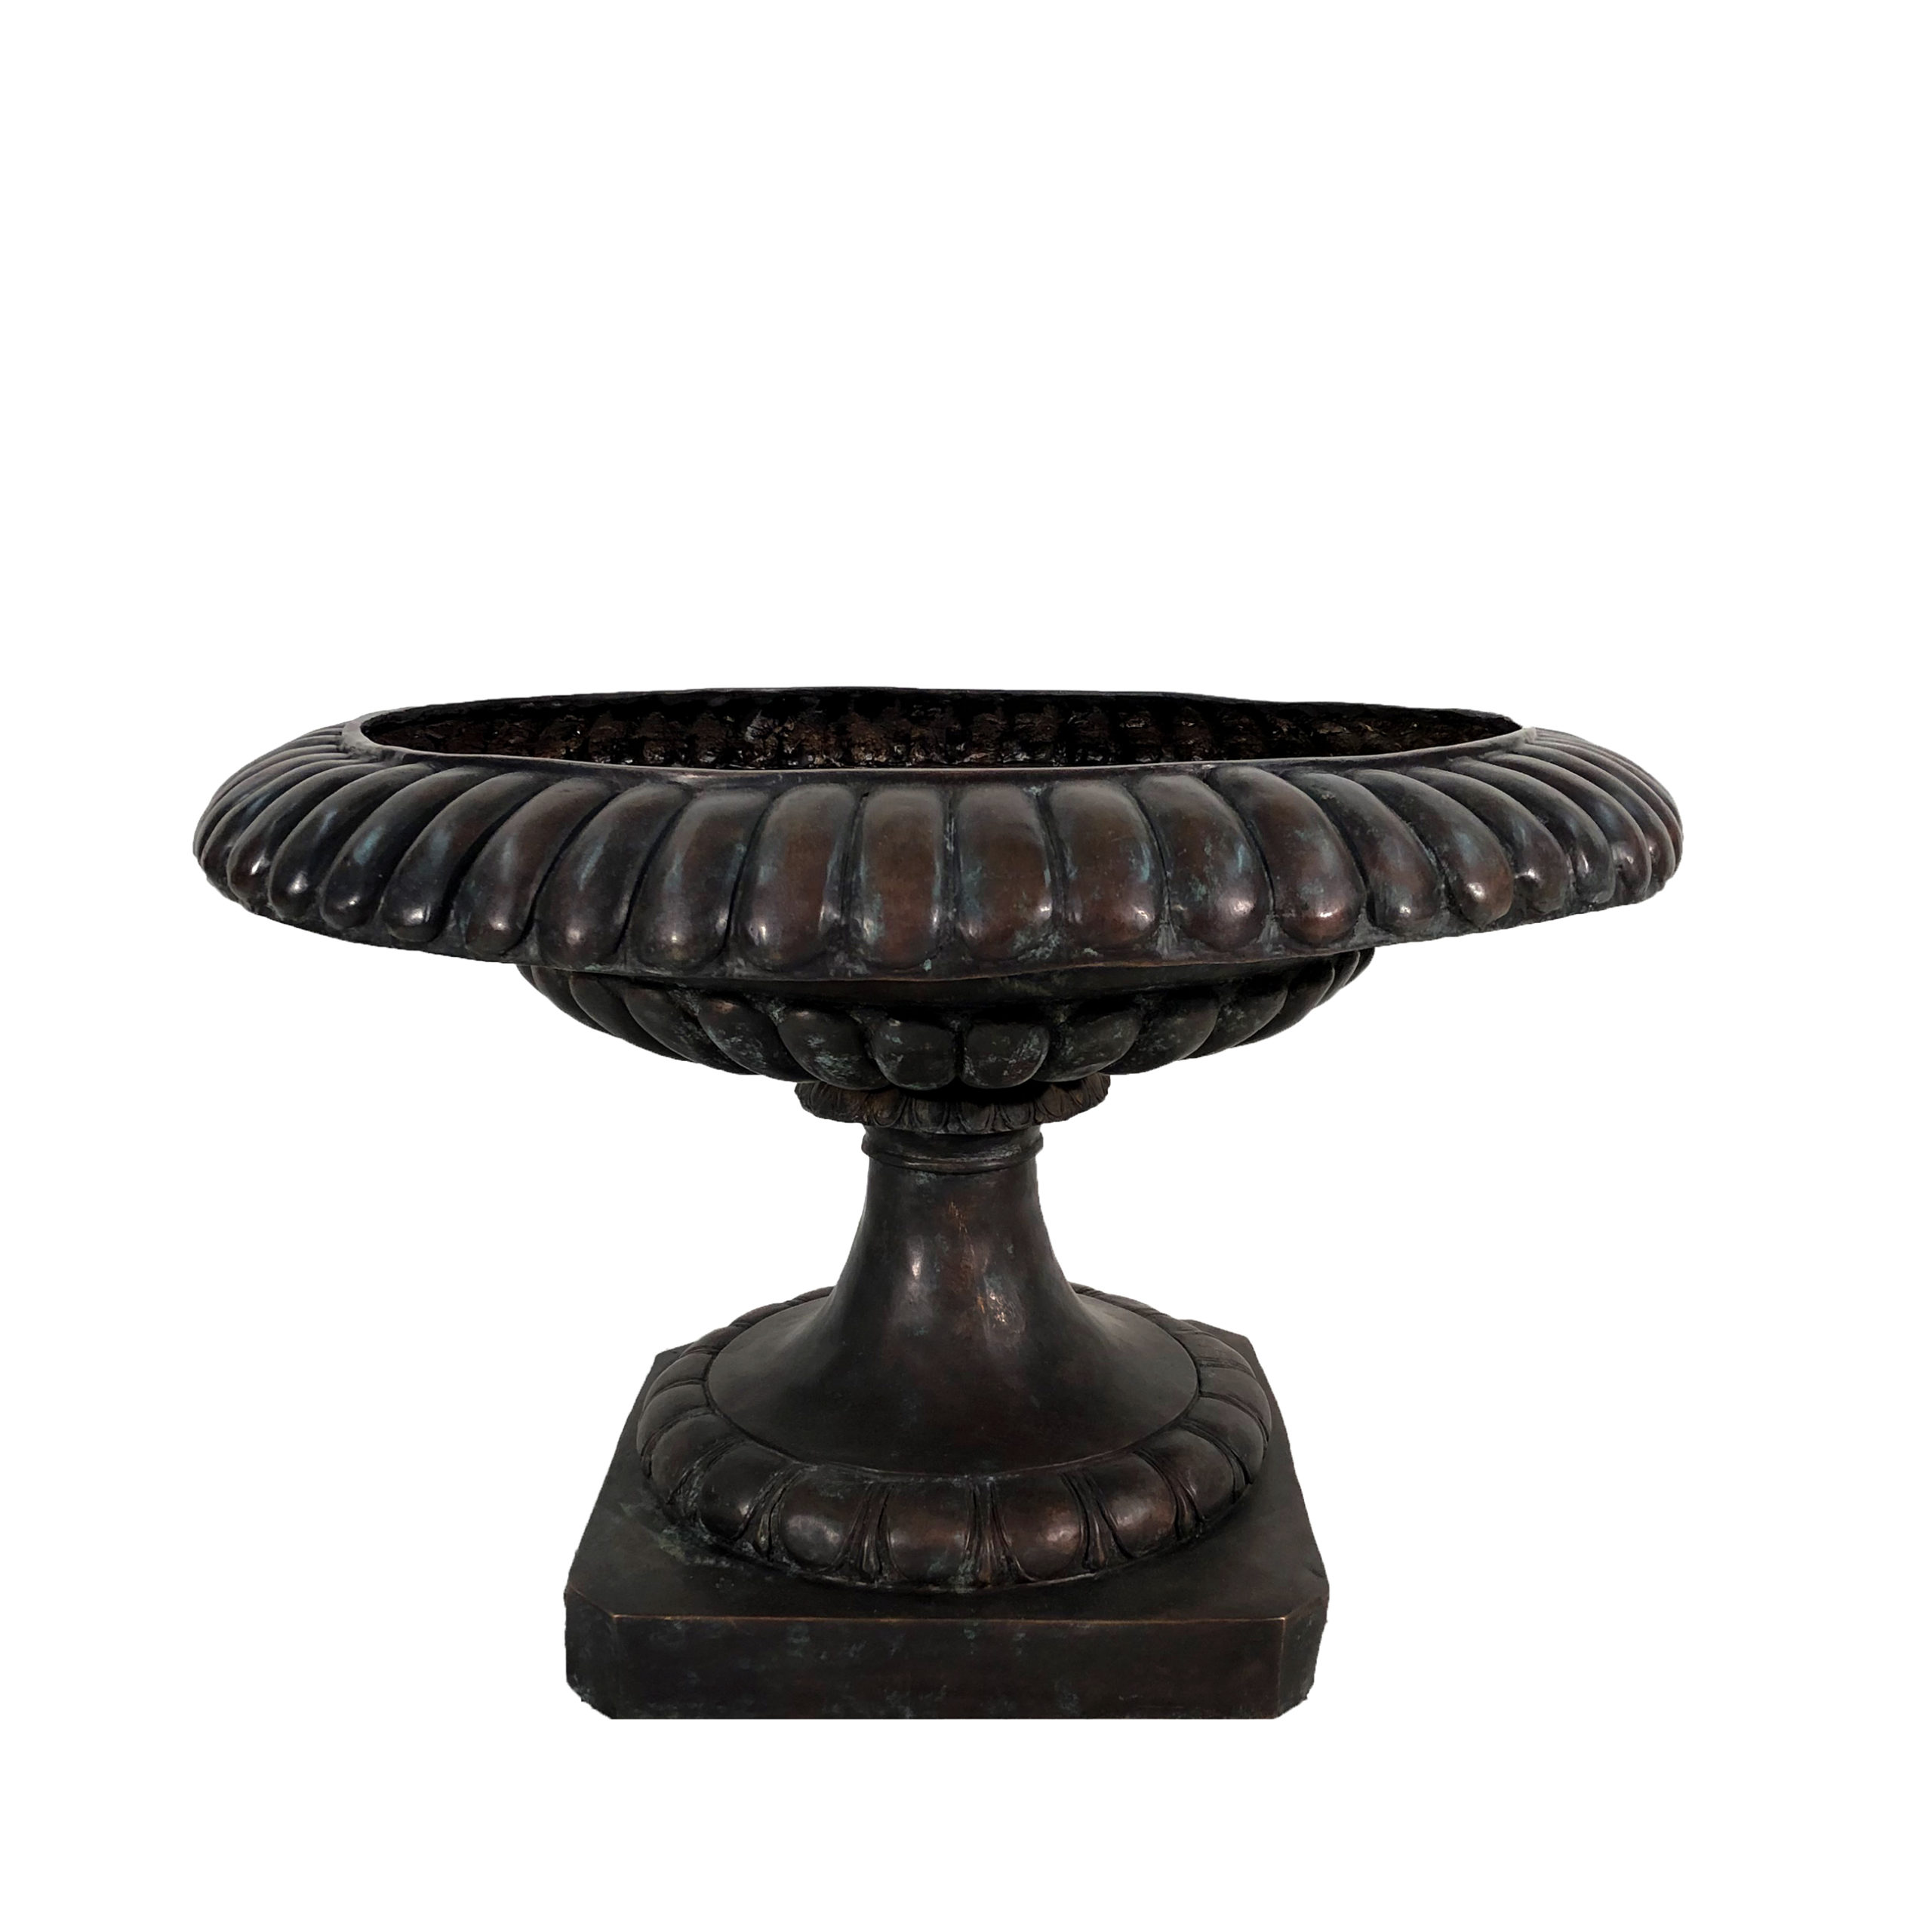 SRB85061 Bronze Traditional Planter Urn with Aged Bronze Patina by Metropolitan Galleries Inc